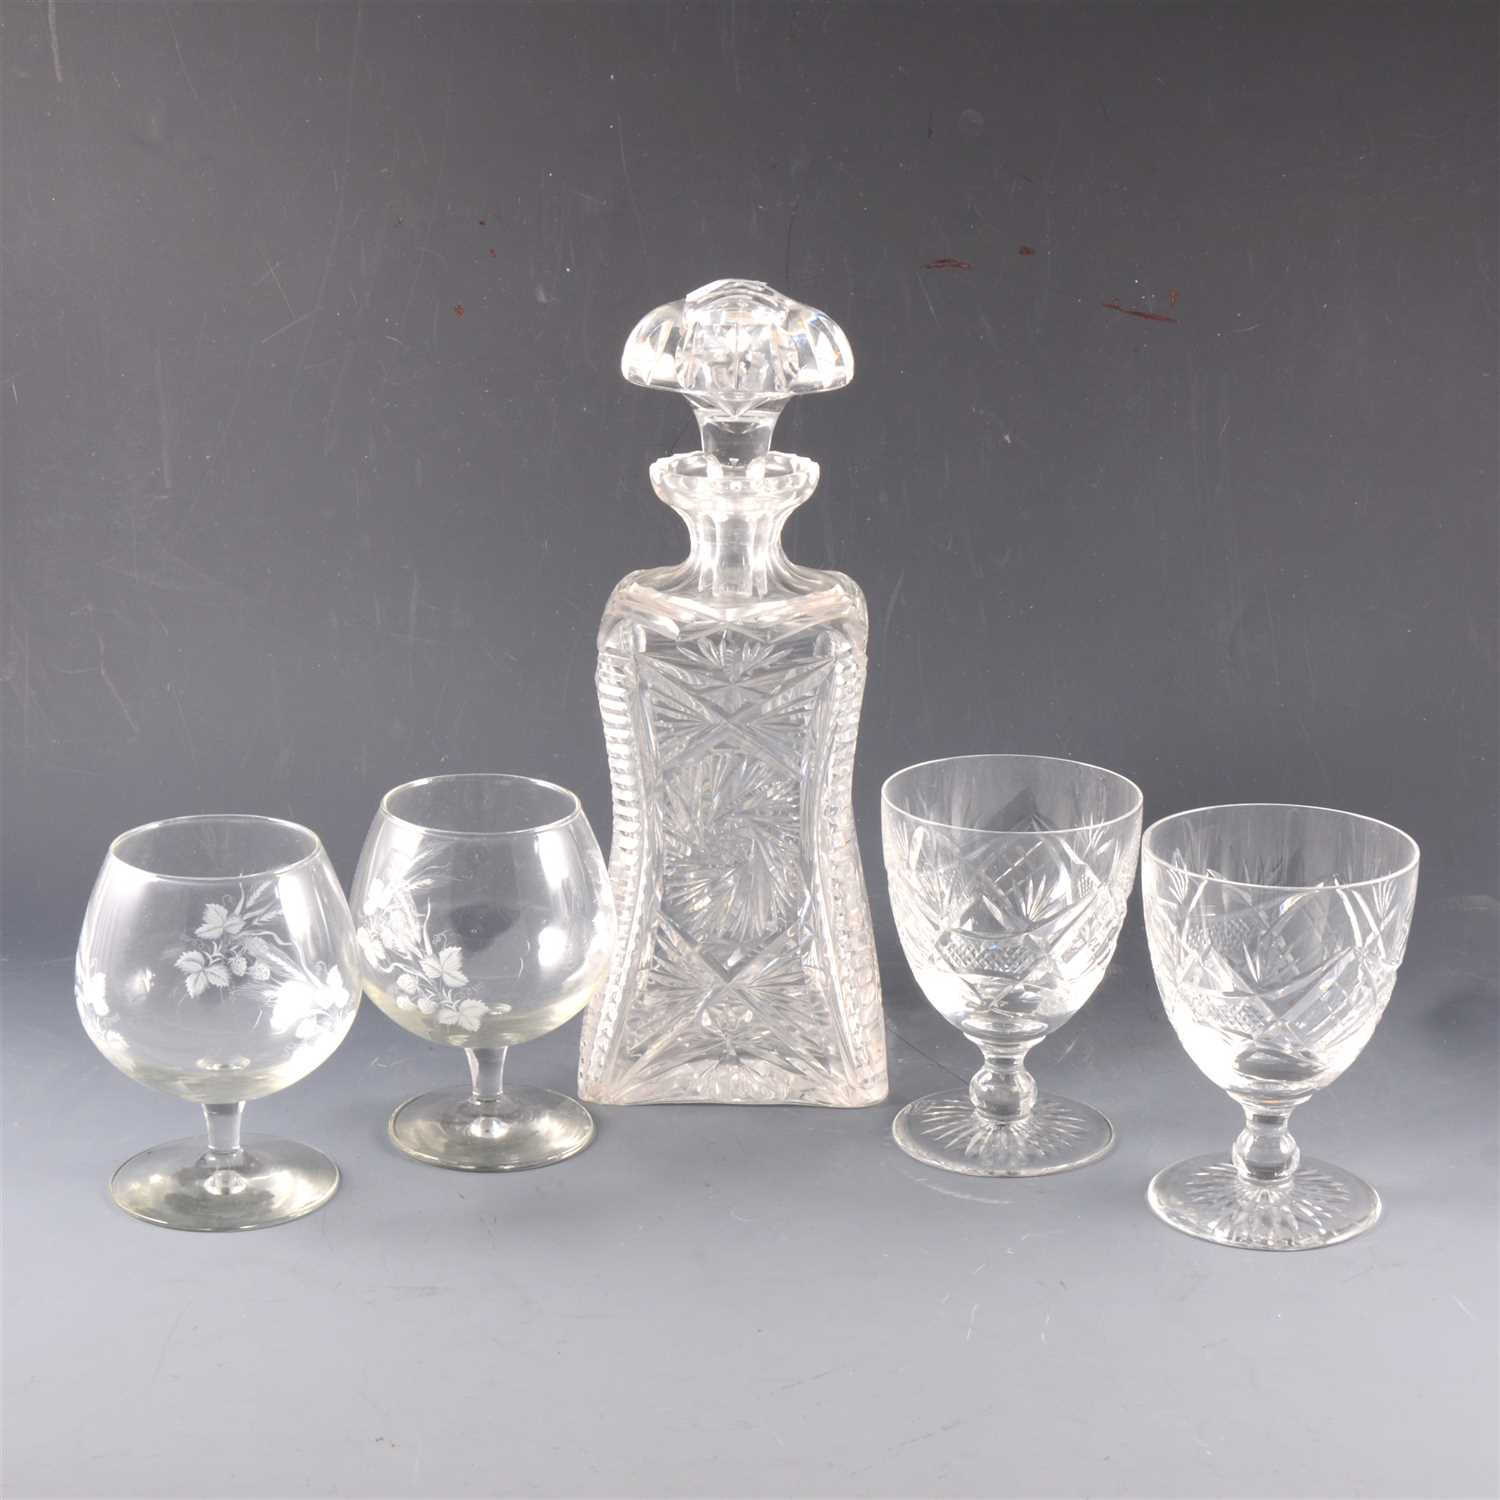 Lot 17 - A cut-glass spirit decanter, and other glassware.